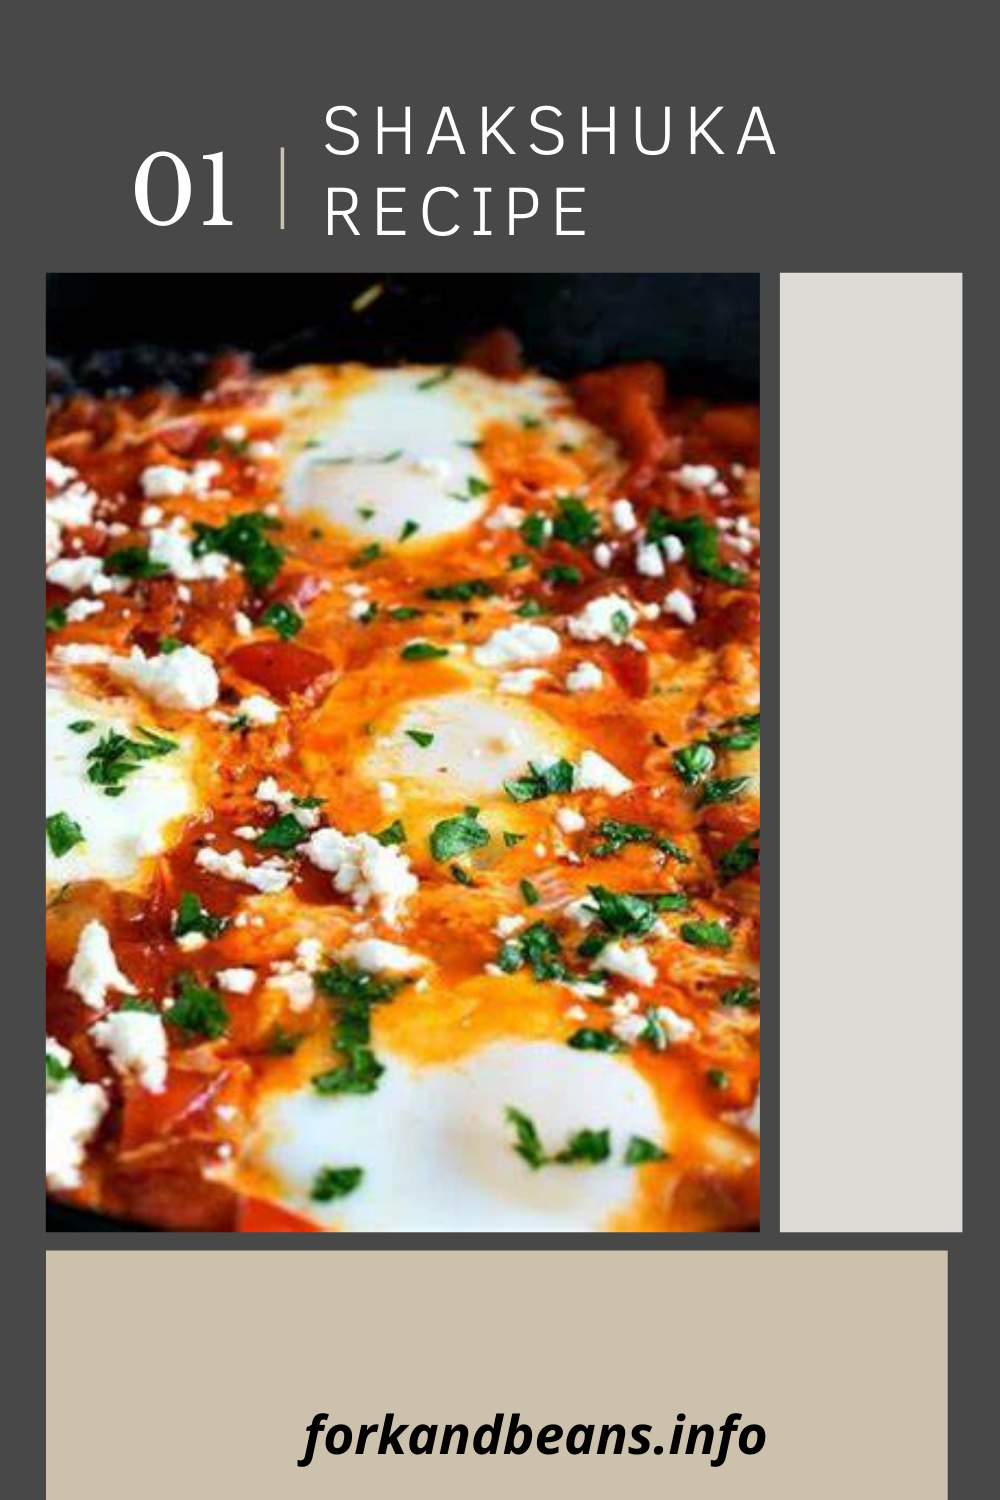 The humble egg is given a Middle Eastern twist with shakshuka.